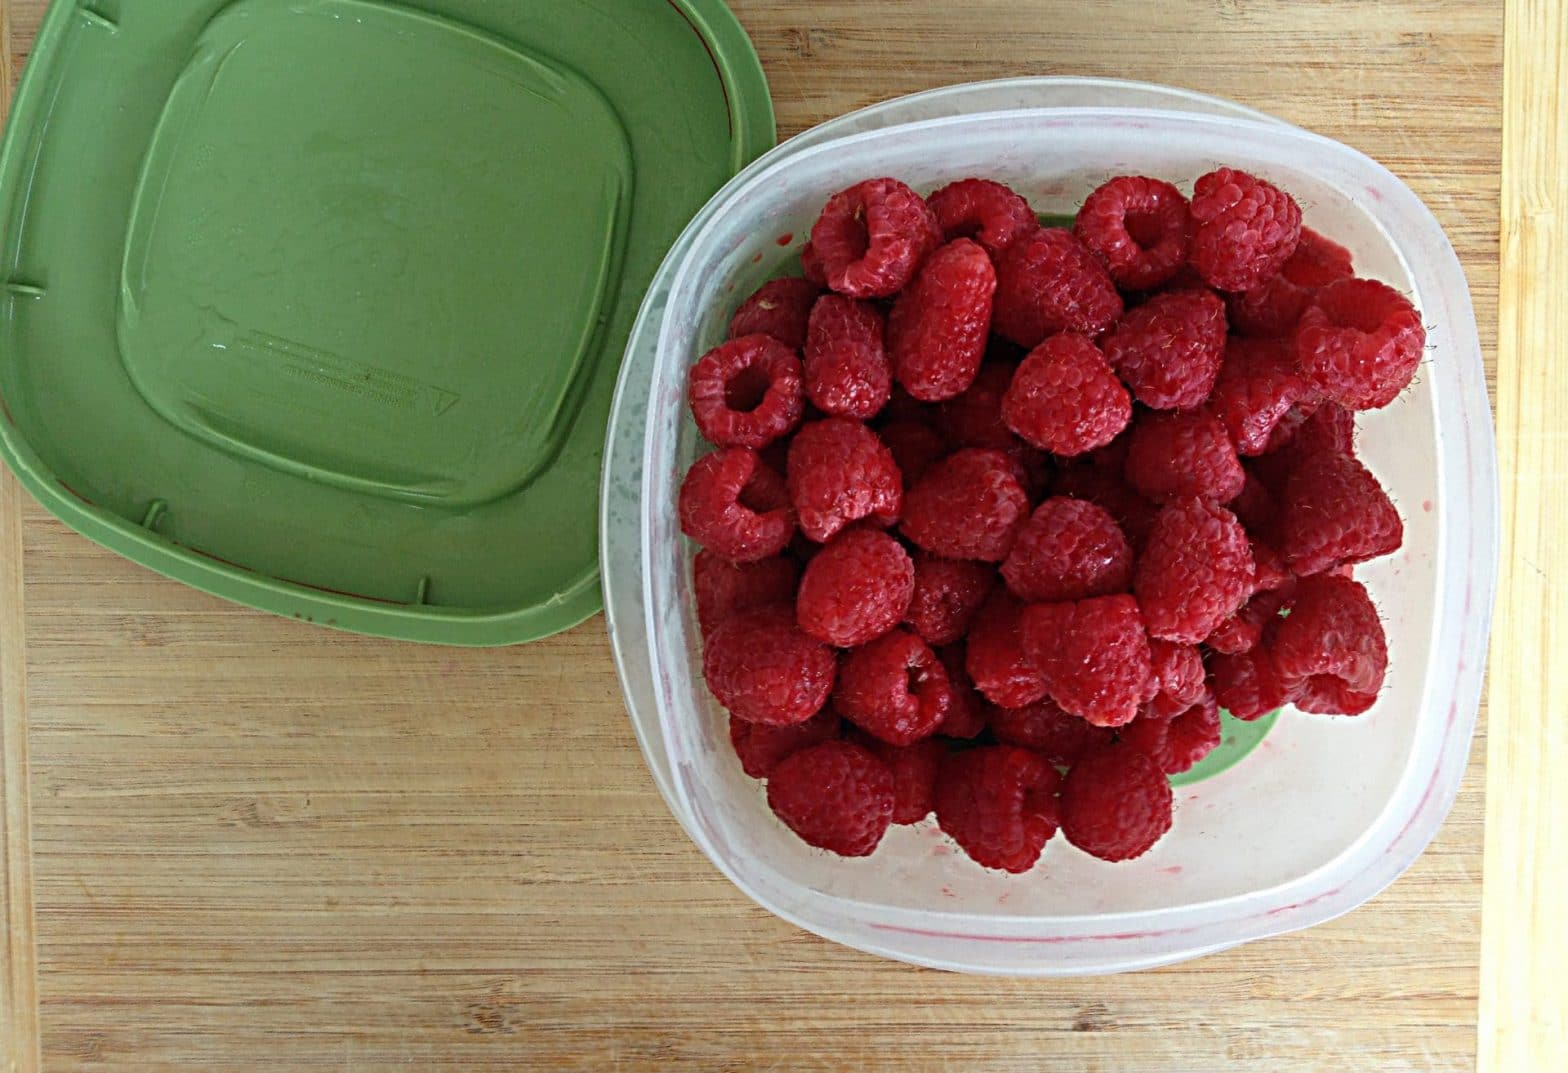 Keep Berries in a Produce Saver!